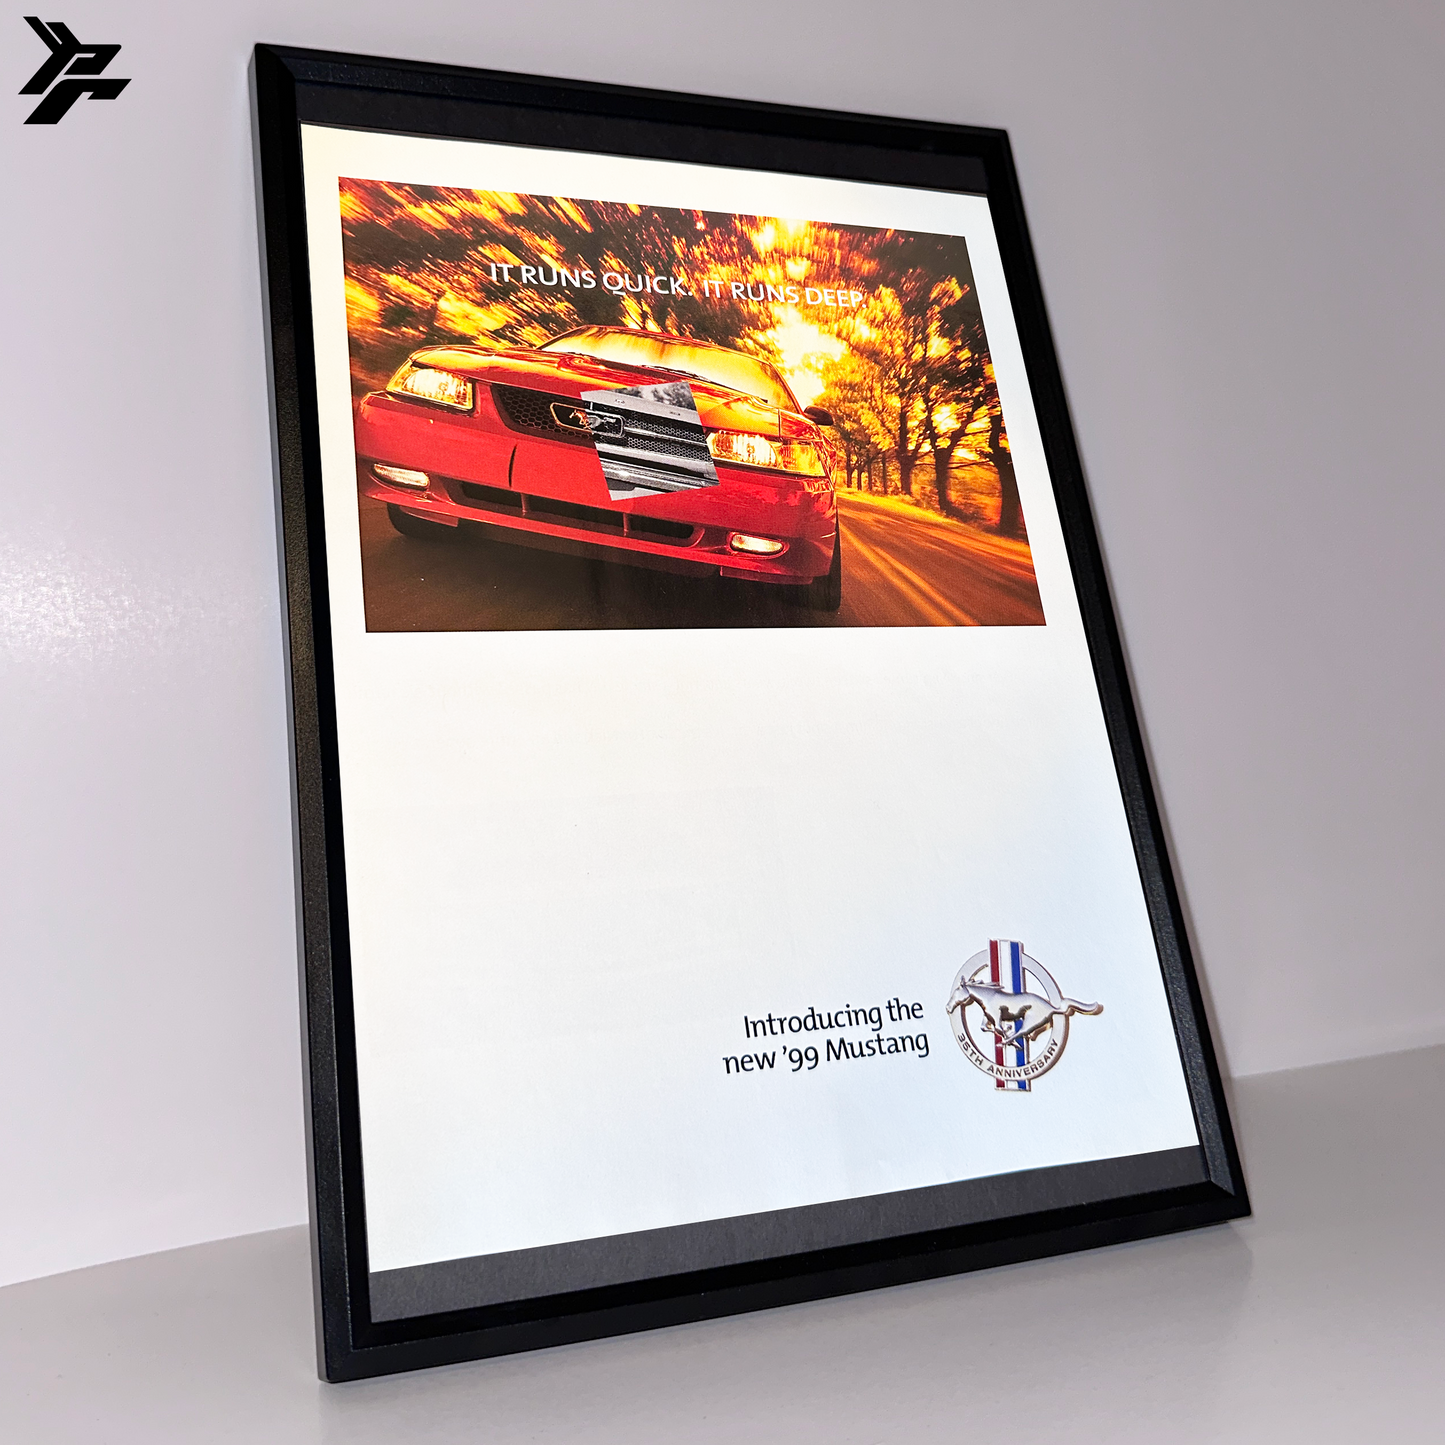 Introducing the new 99' mustang framed ad